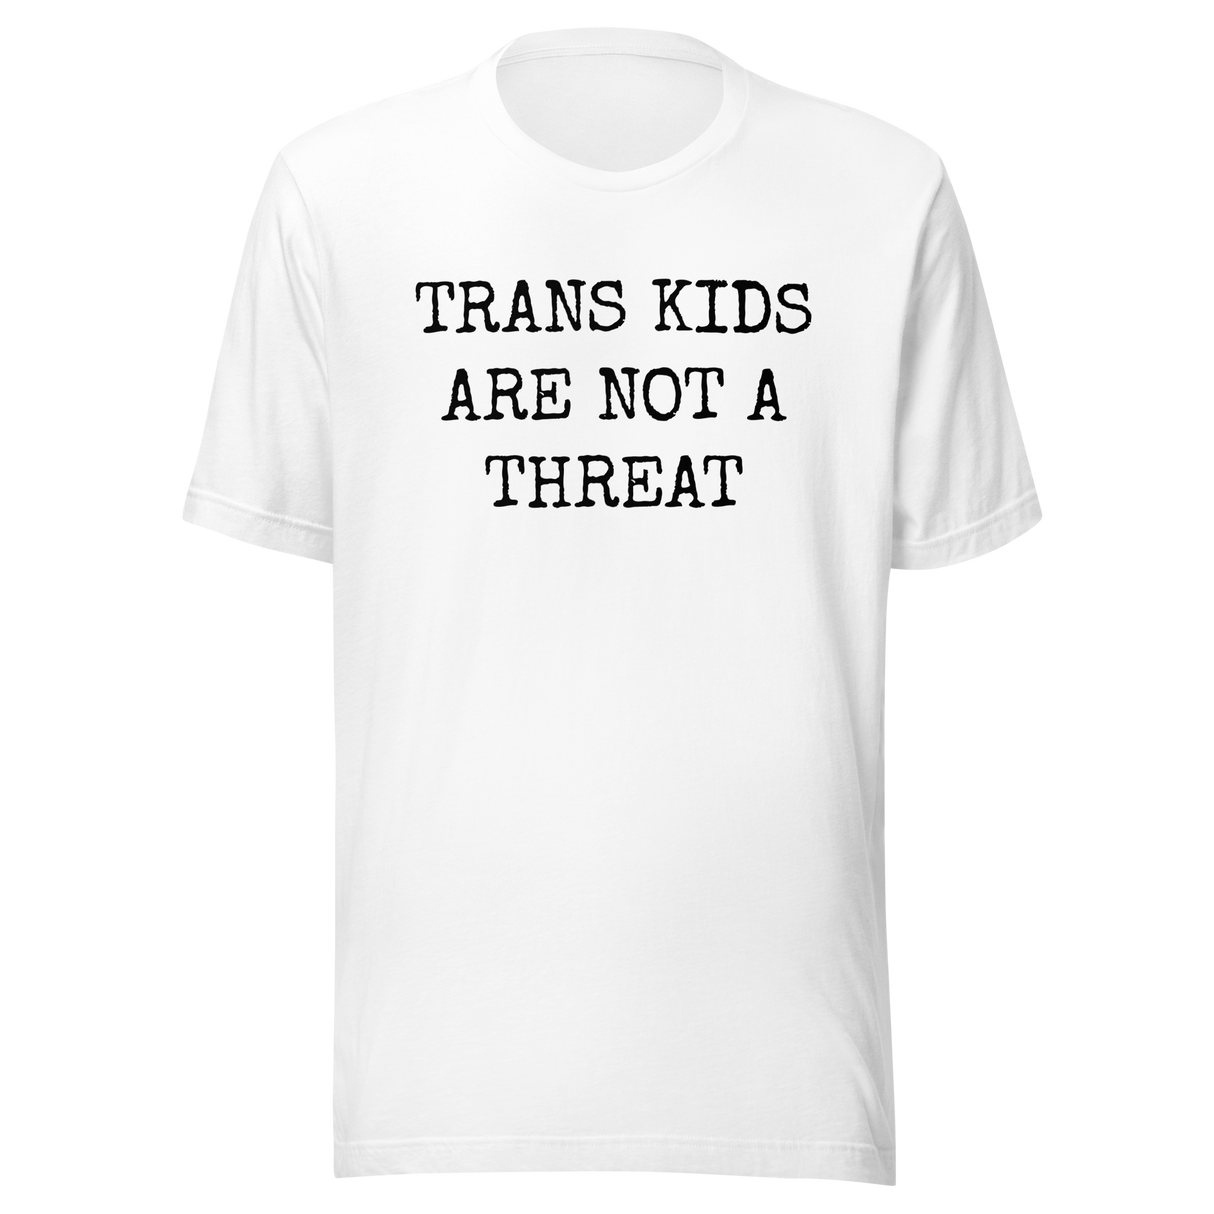 trans-kids-are-not-a-threat-trans-tee-kids-t-shirt-threat-tee-t-shirt-tee#color_white